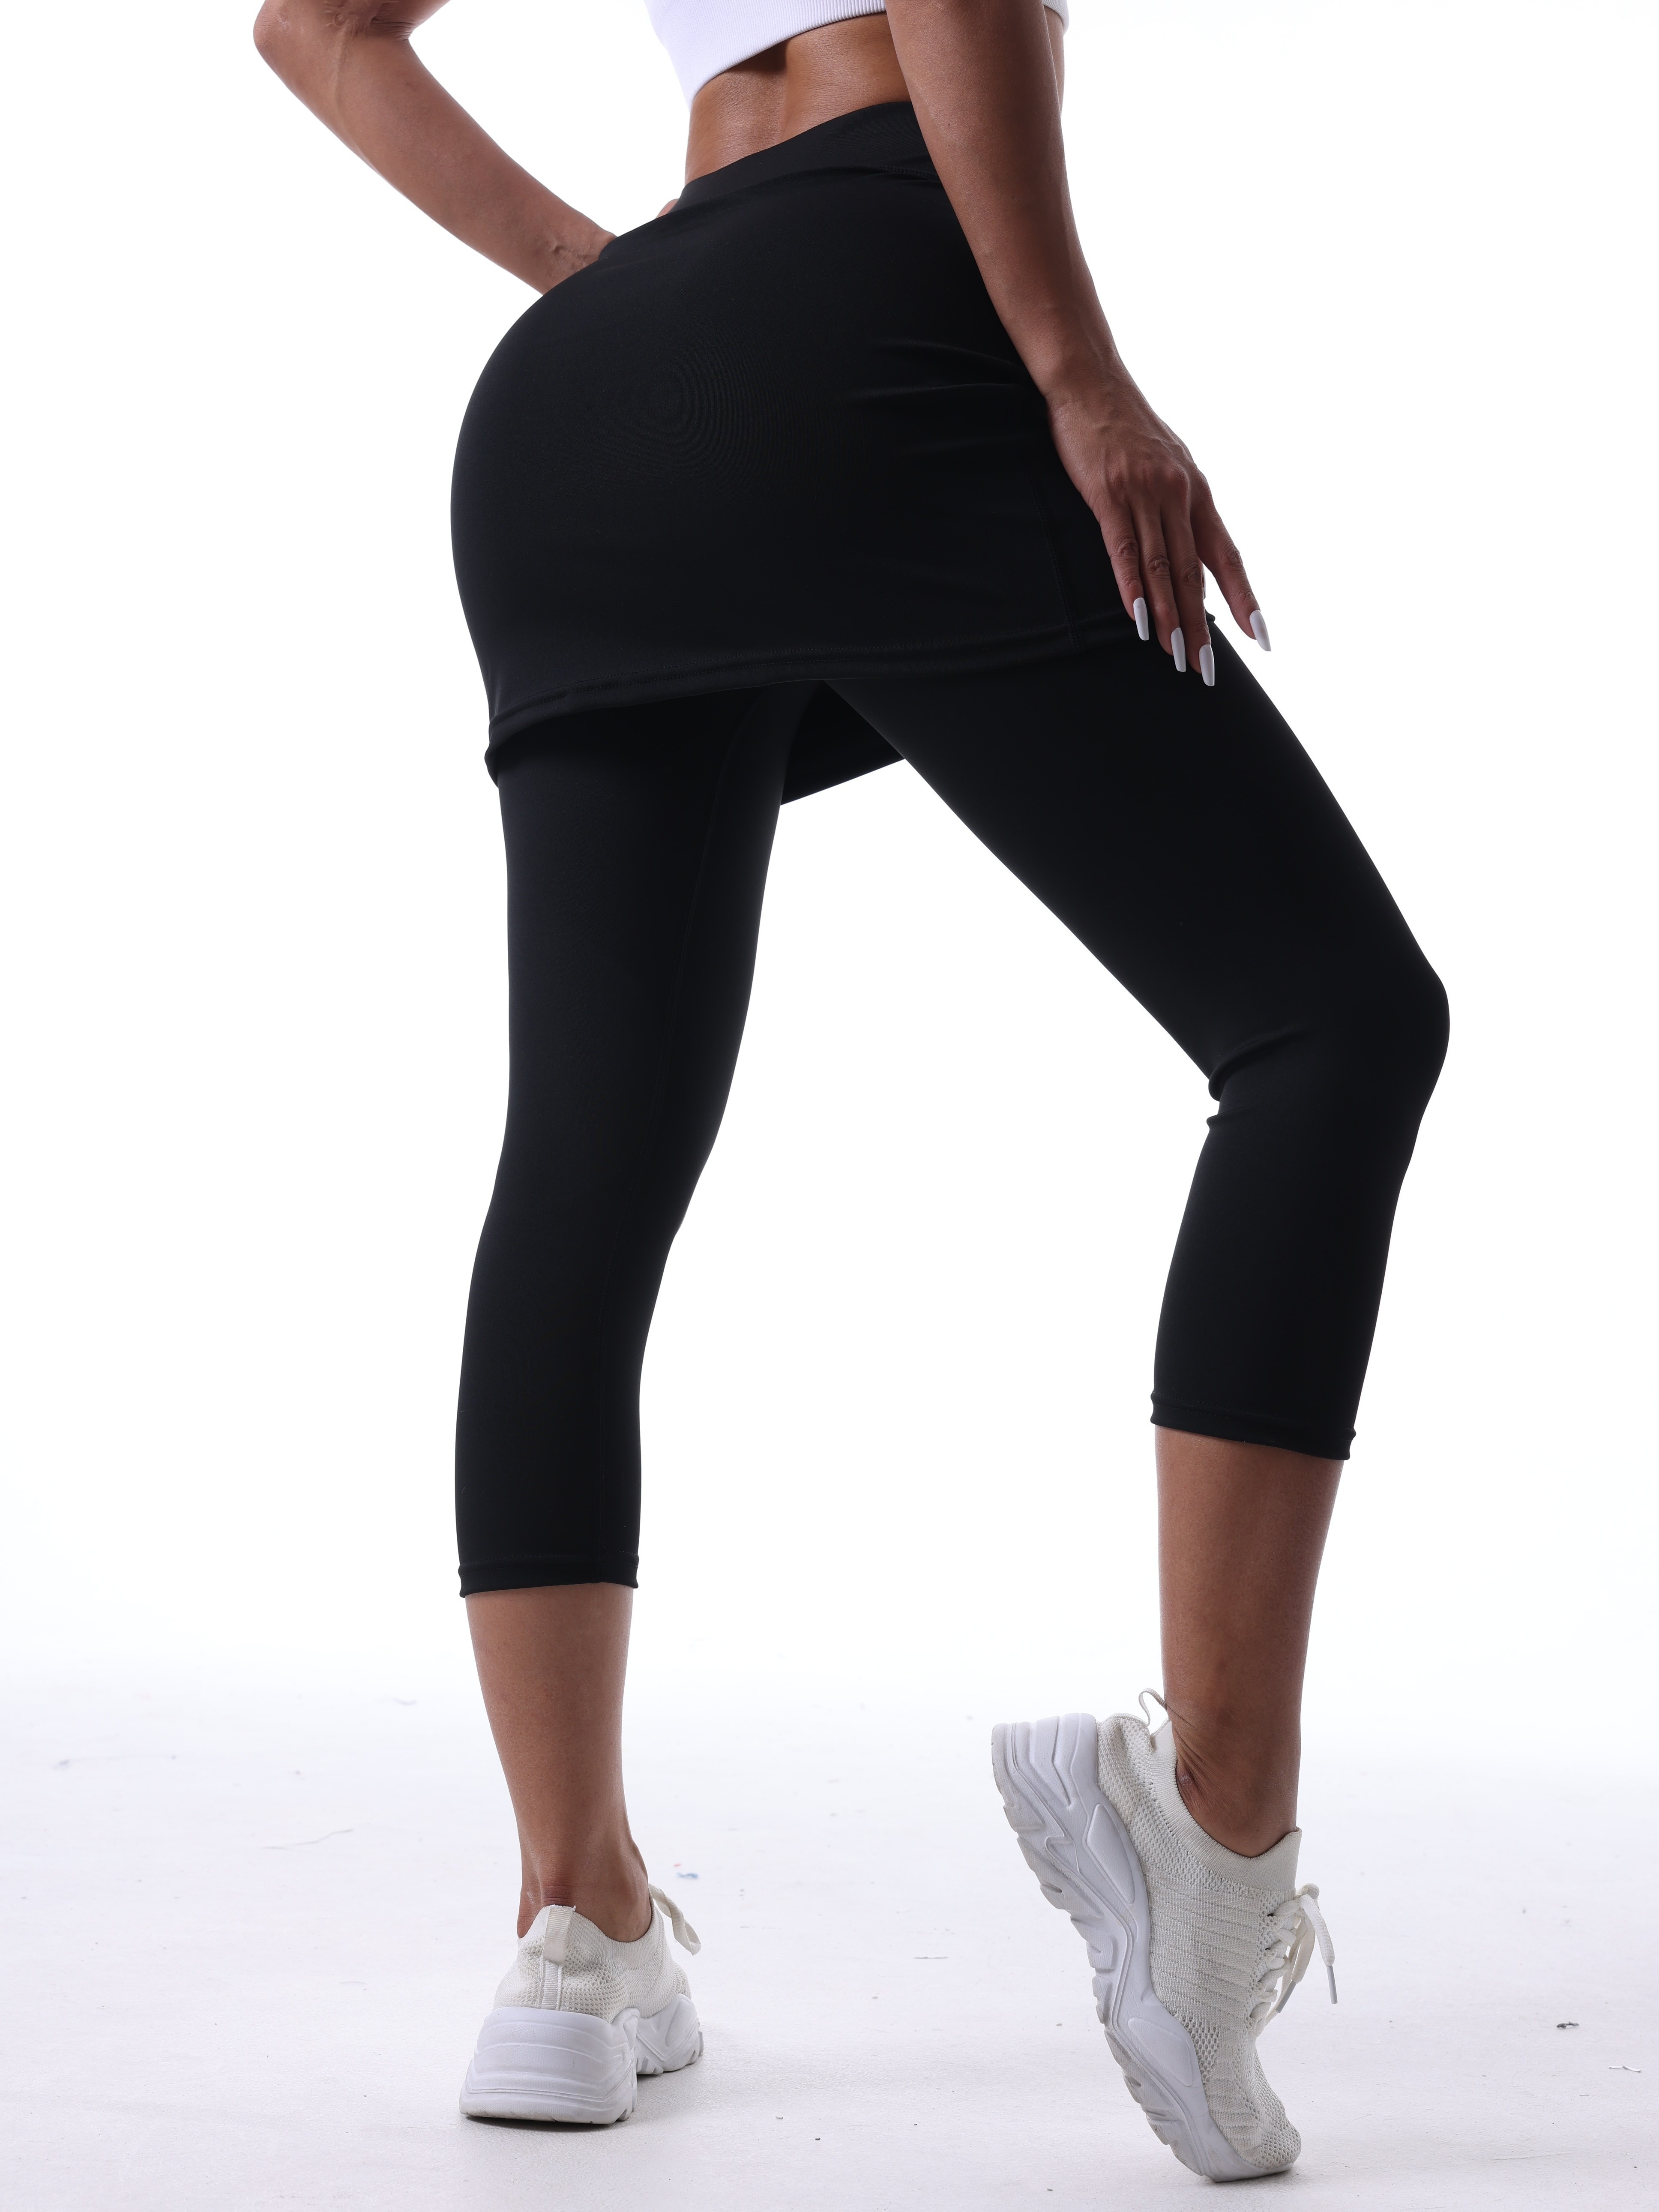 *° Women's 2-in-1 Solid Color Tennis Skirts With Leggings, Stretchy Outwear  Sports Pants For Yoga Fitness Running, Casual Pants, Women's Activewear